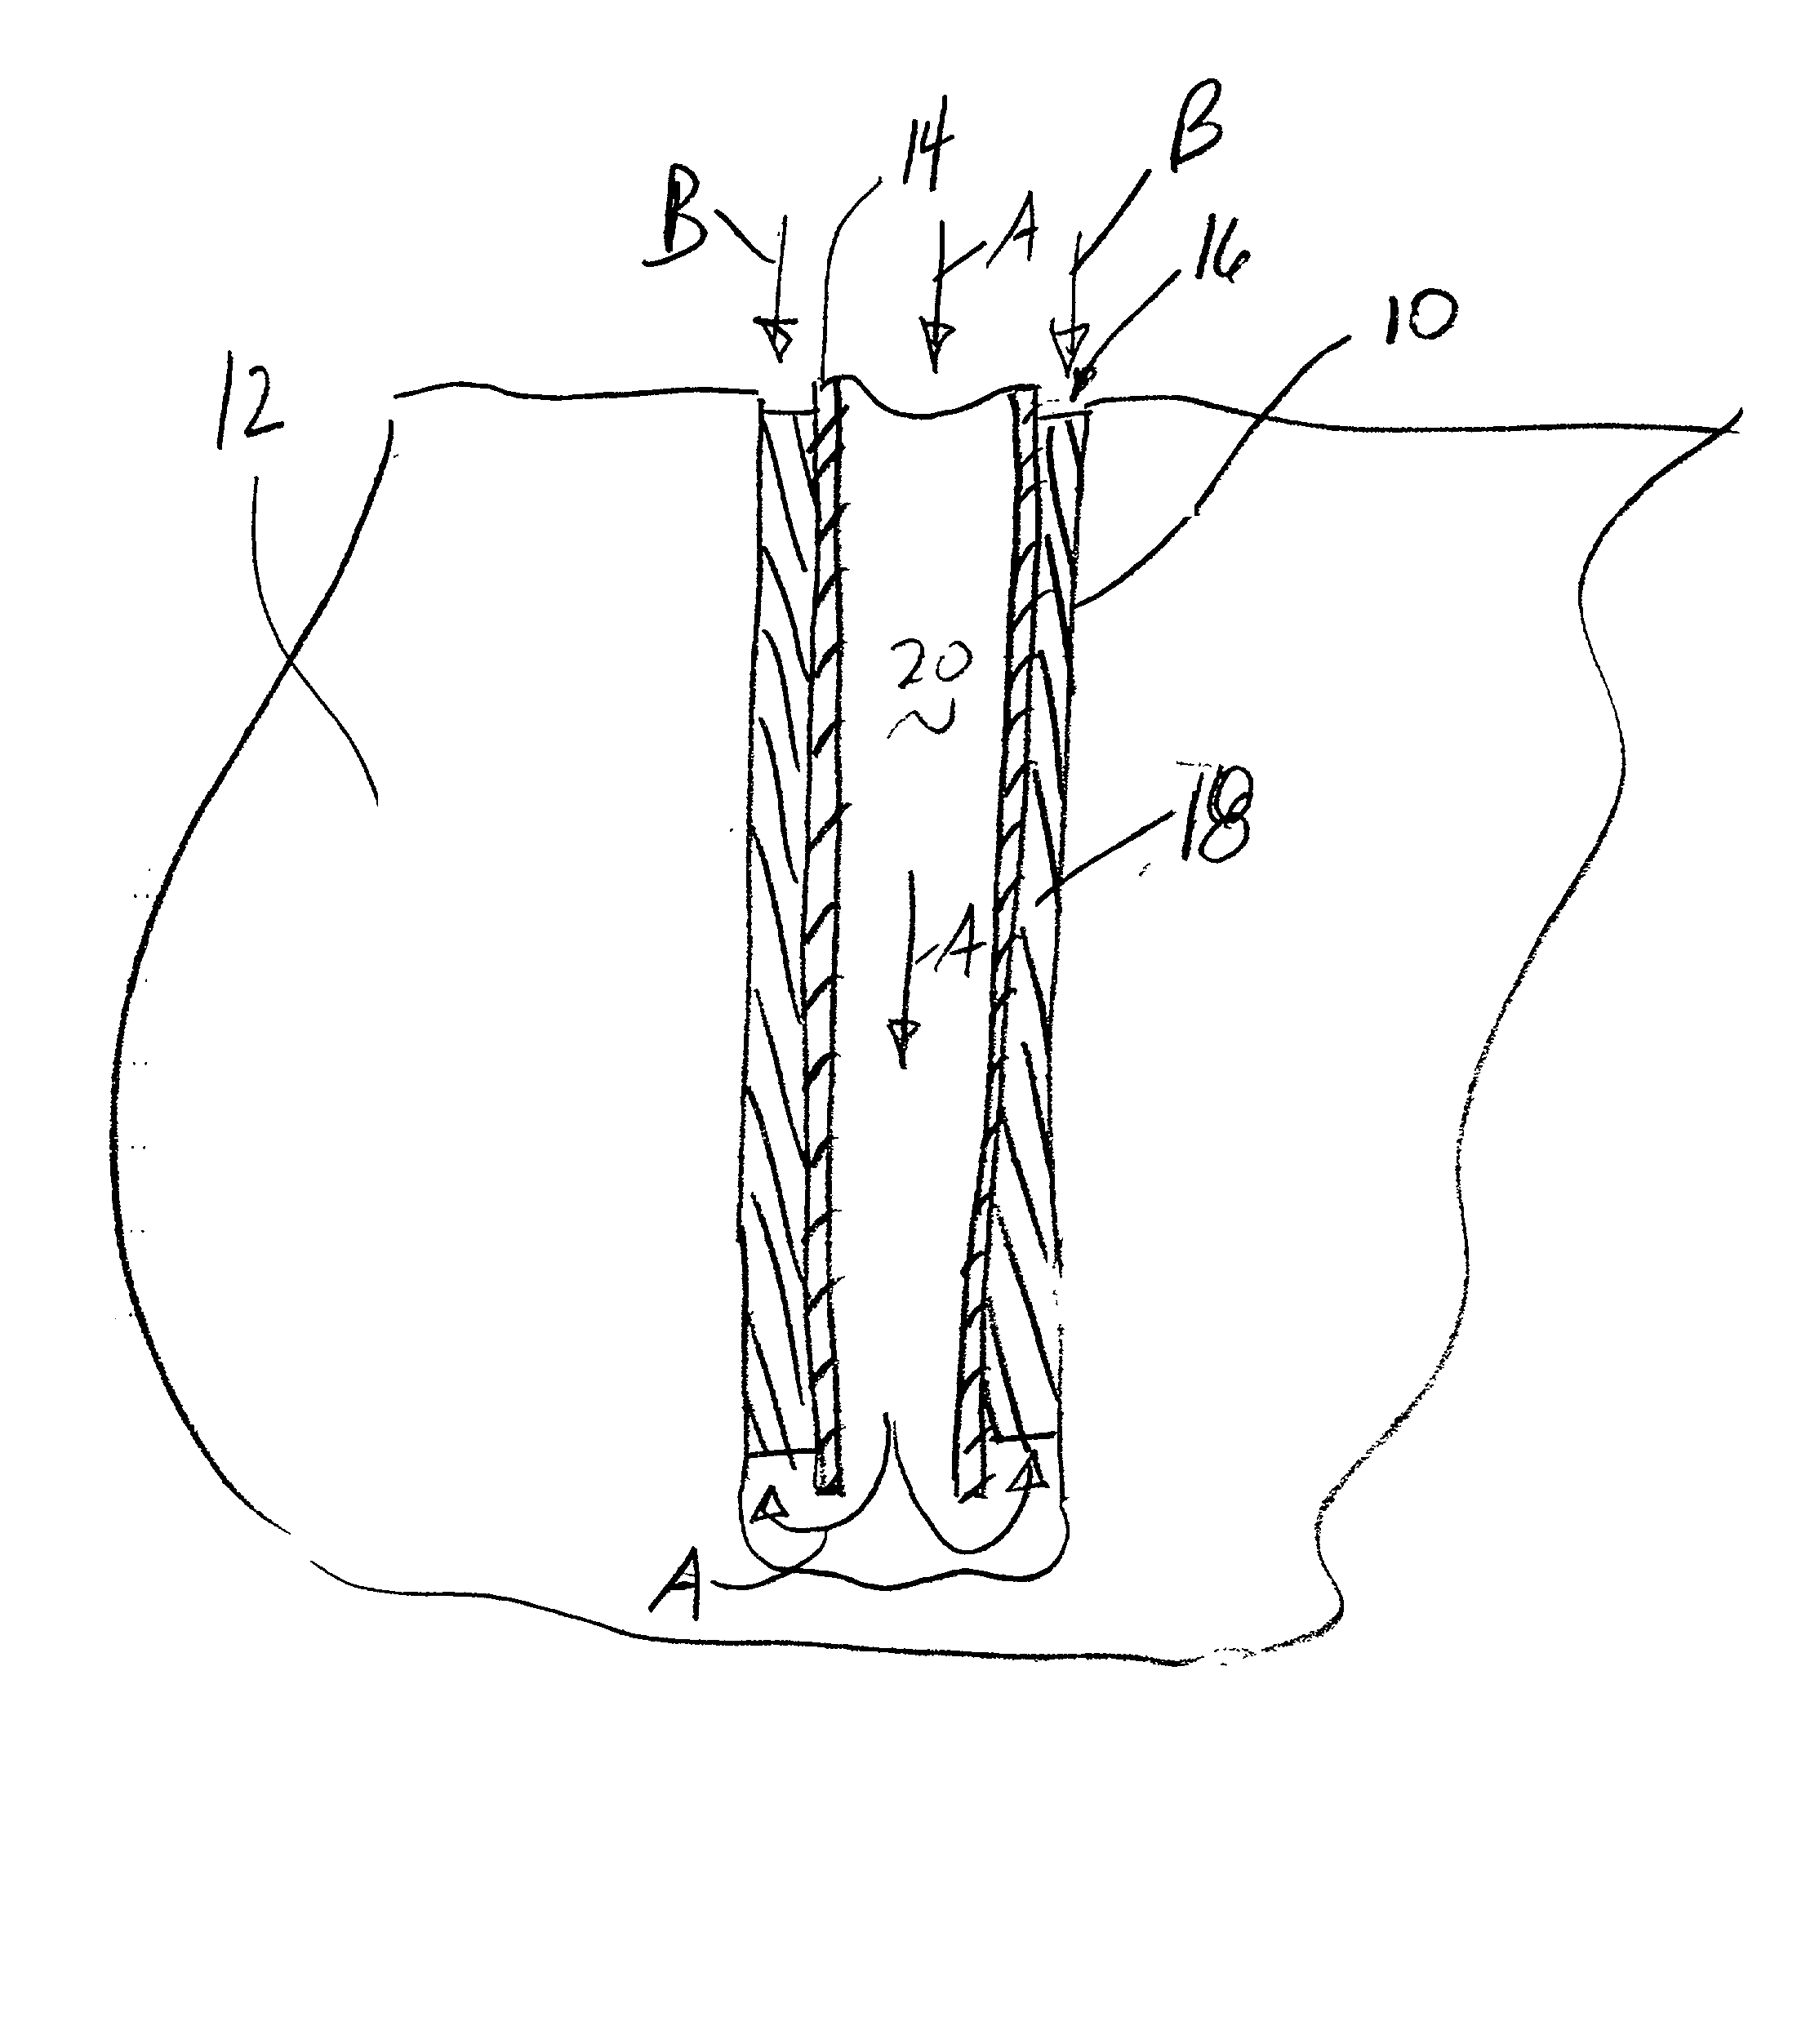 Composition and method for sealing an annular space between a well bore and a casing